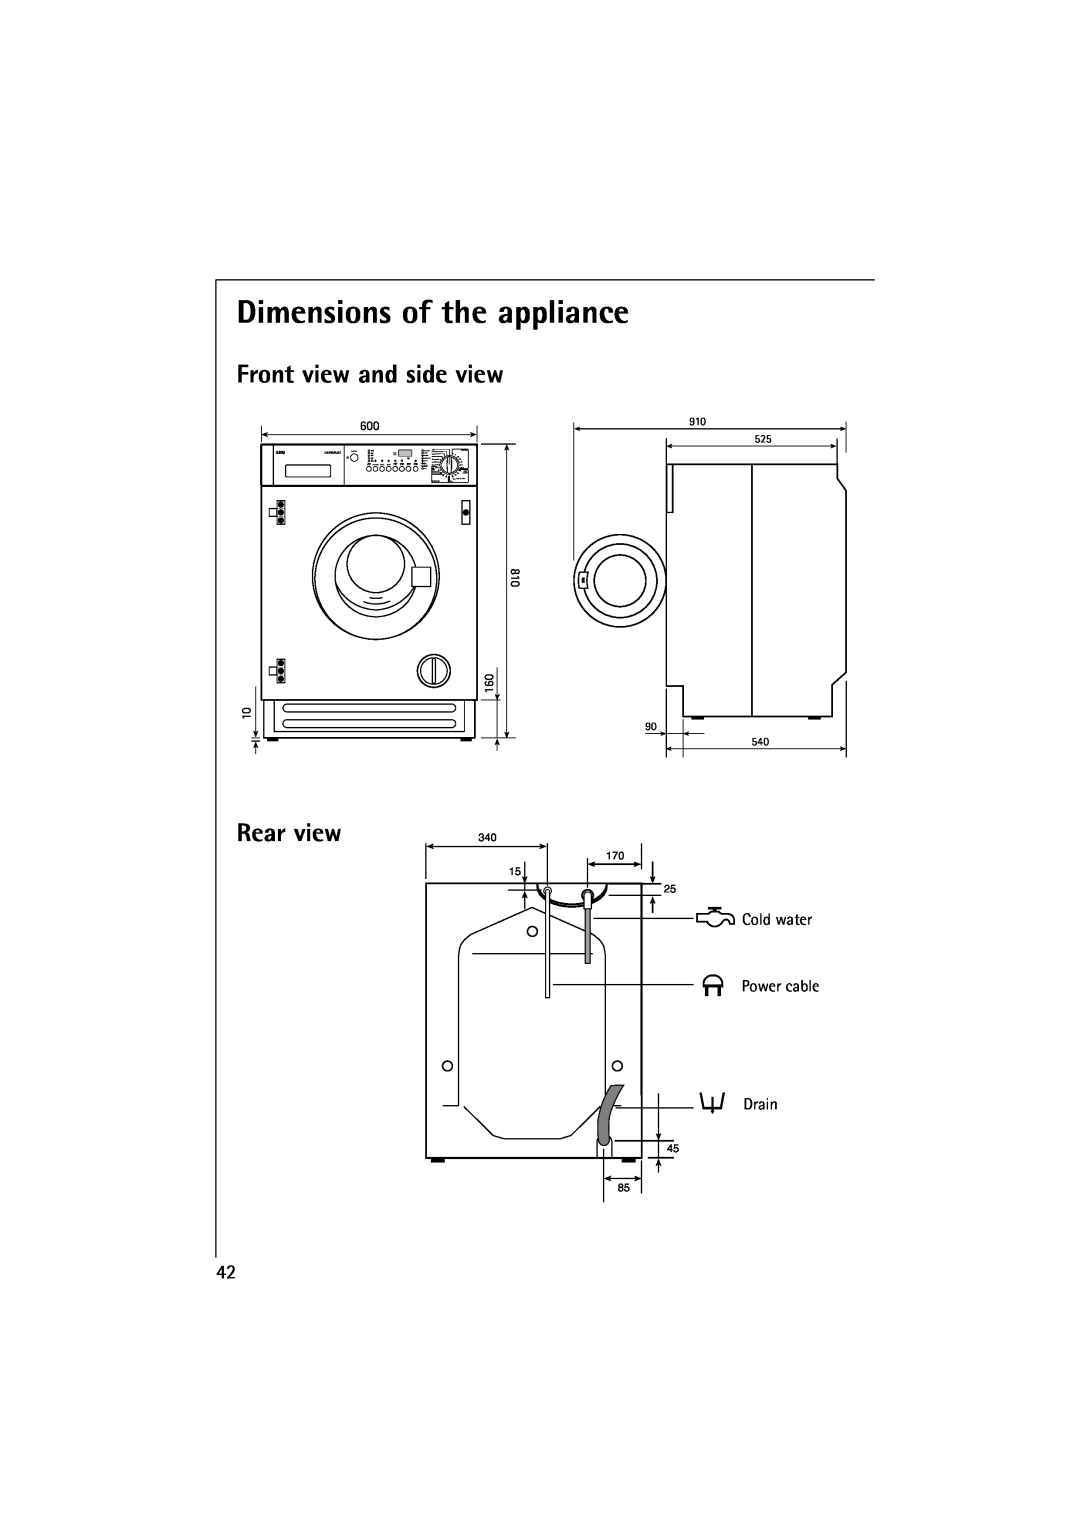 Electrolux 10500 VI Dimensions of the appliance, Front view and side view, Rear view, Cold water, Power cable, Lavamat 